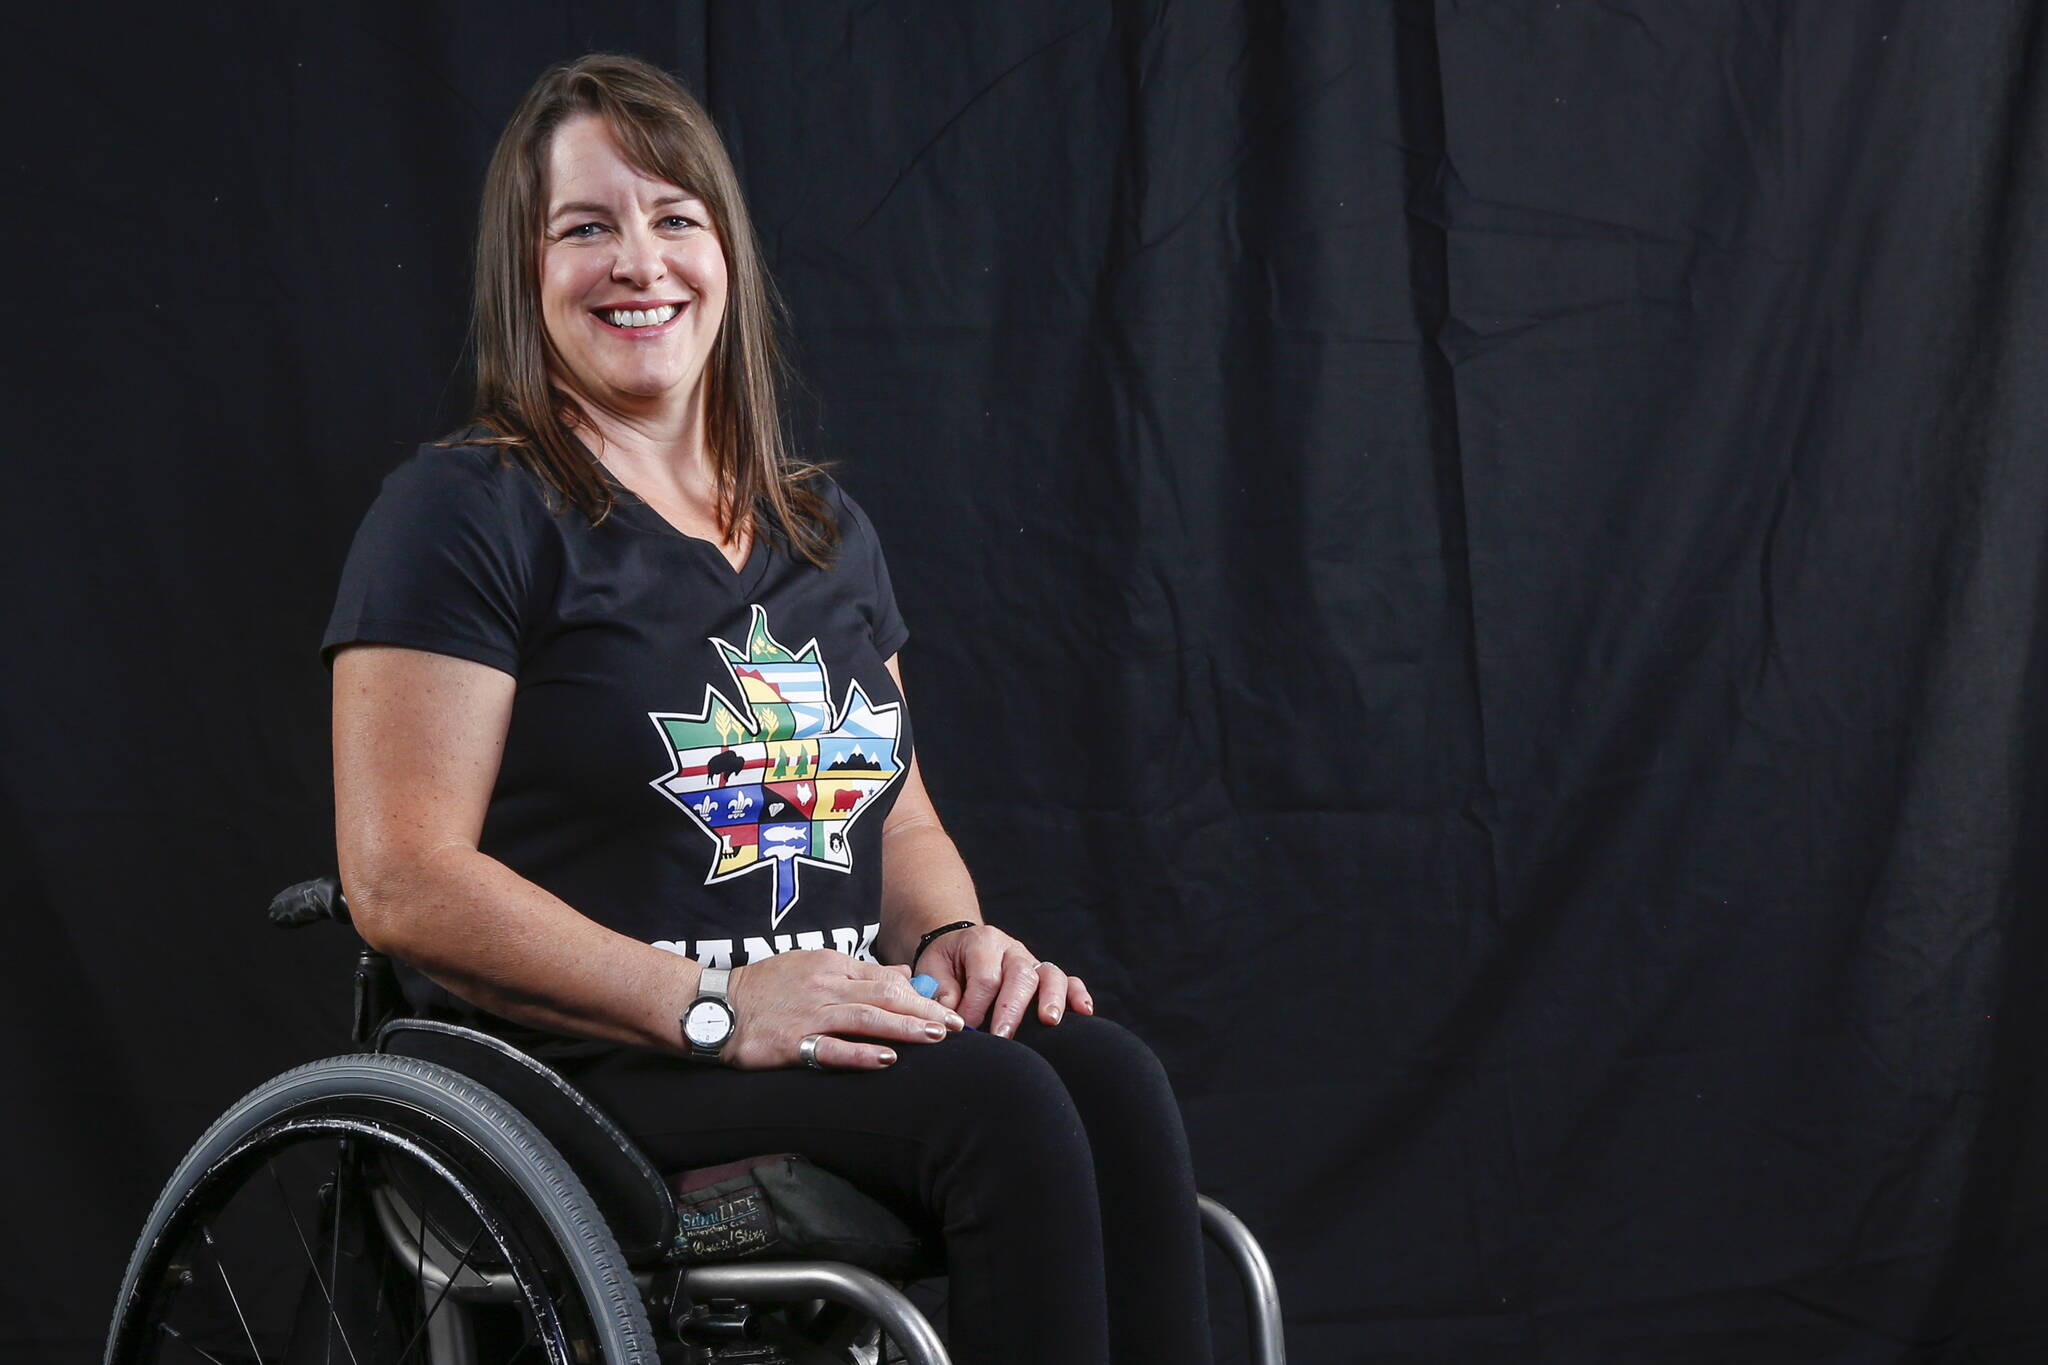 Canadian Paralympic athlete Ina Forrest poses for a photo at the Paralympic Summit in Calgary, Alta., Monday, June 5, 2017.THE CANADIAN PRESS/Jeff McIntosh